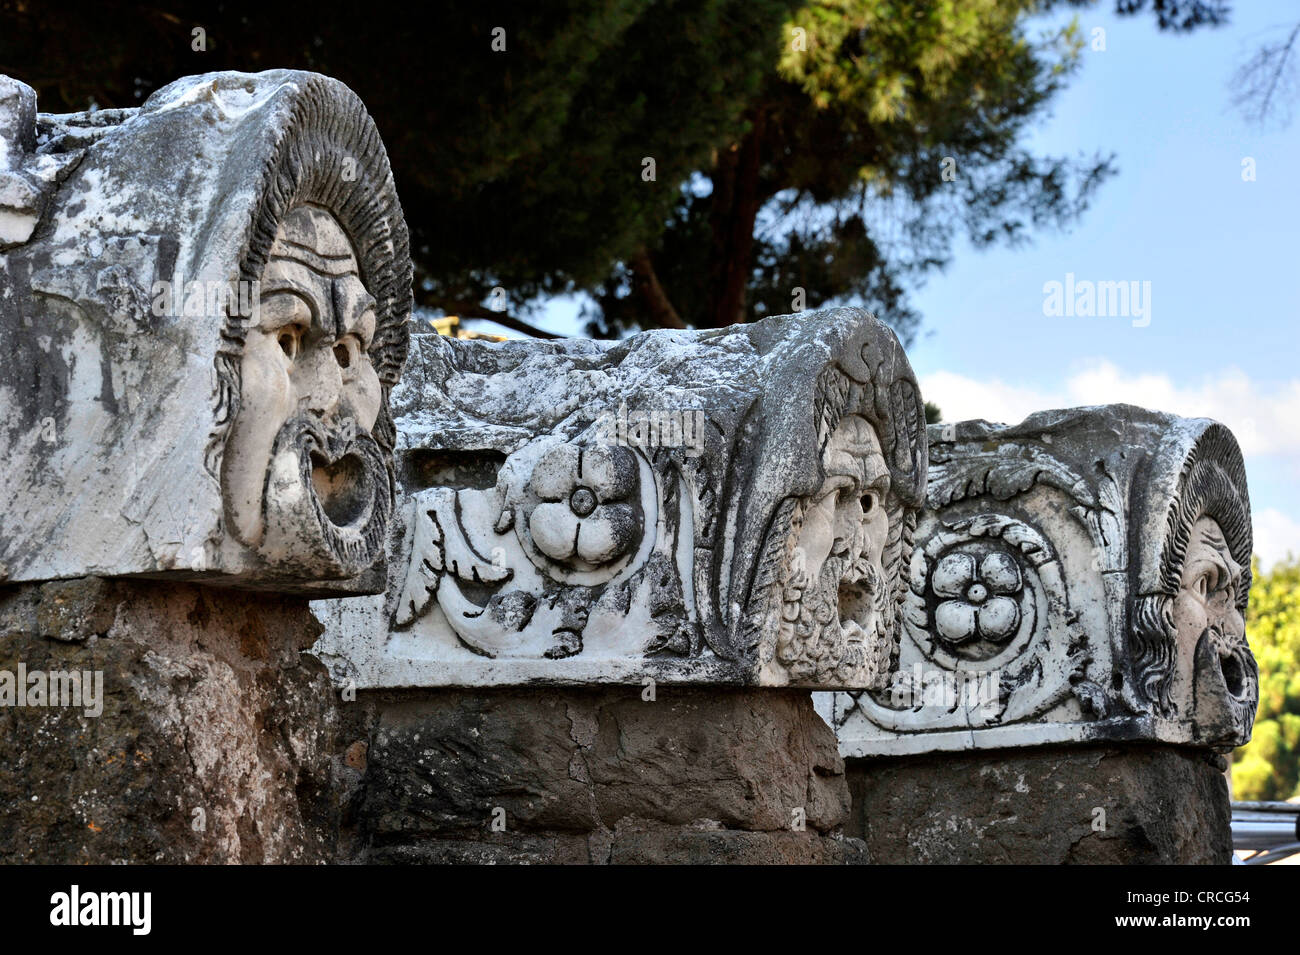 Ancient stone masks at the Roman theater in the Ostia Antica archaeological site, ancient port city of Rome, Lazio, Italy Stock Photo